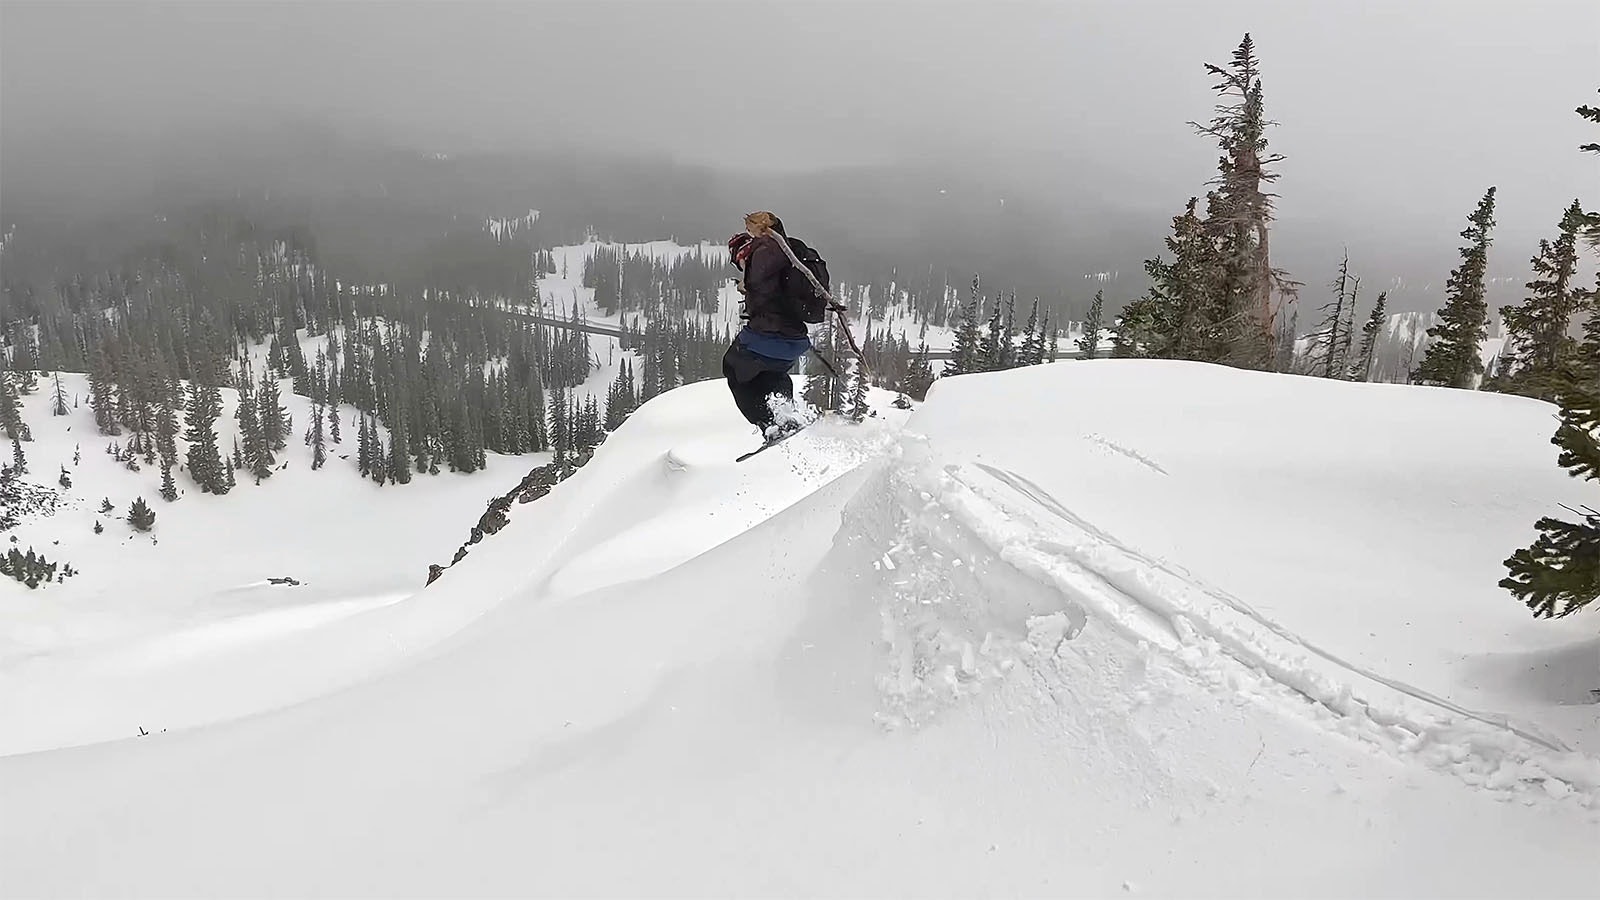 Nick Fadial of Laramie catches some air while enjoying midseason backcountry skiing conditions in Wyomng's Snowy Range over the Memorial Day weekend.